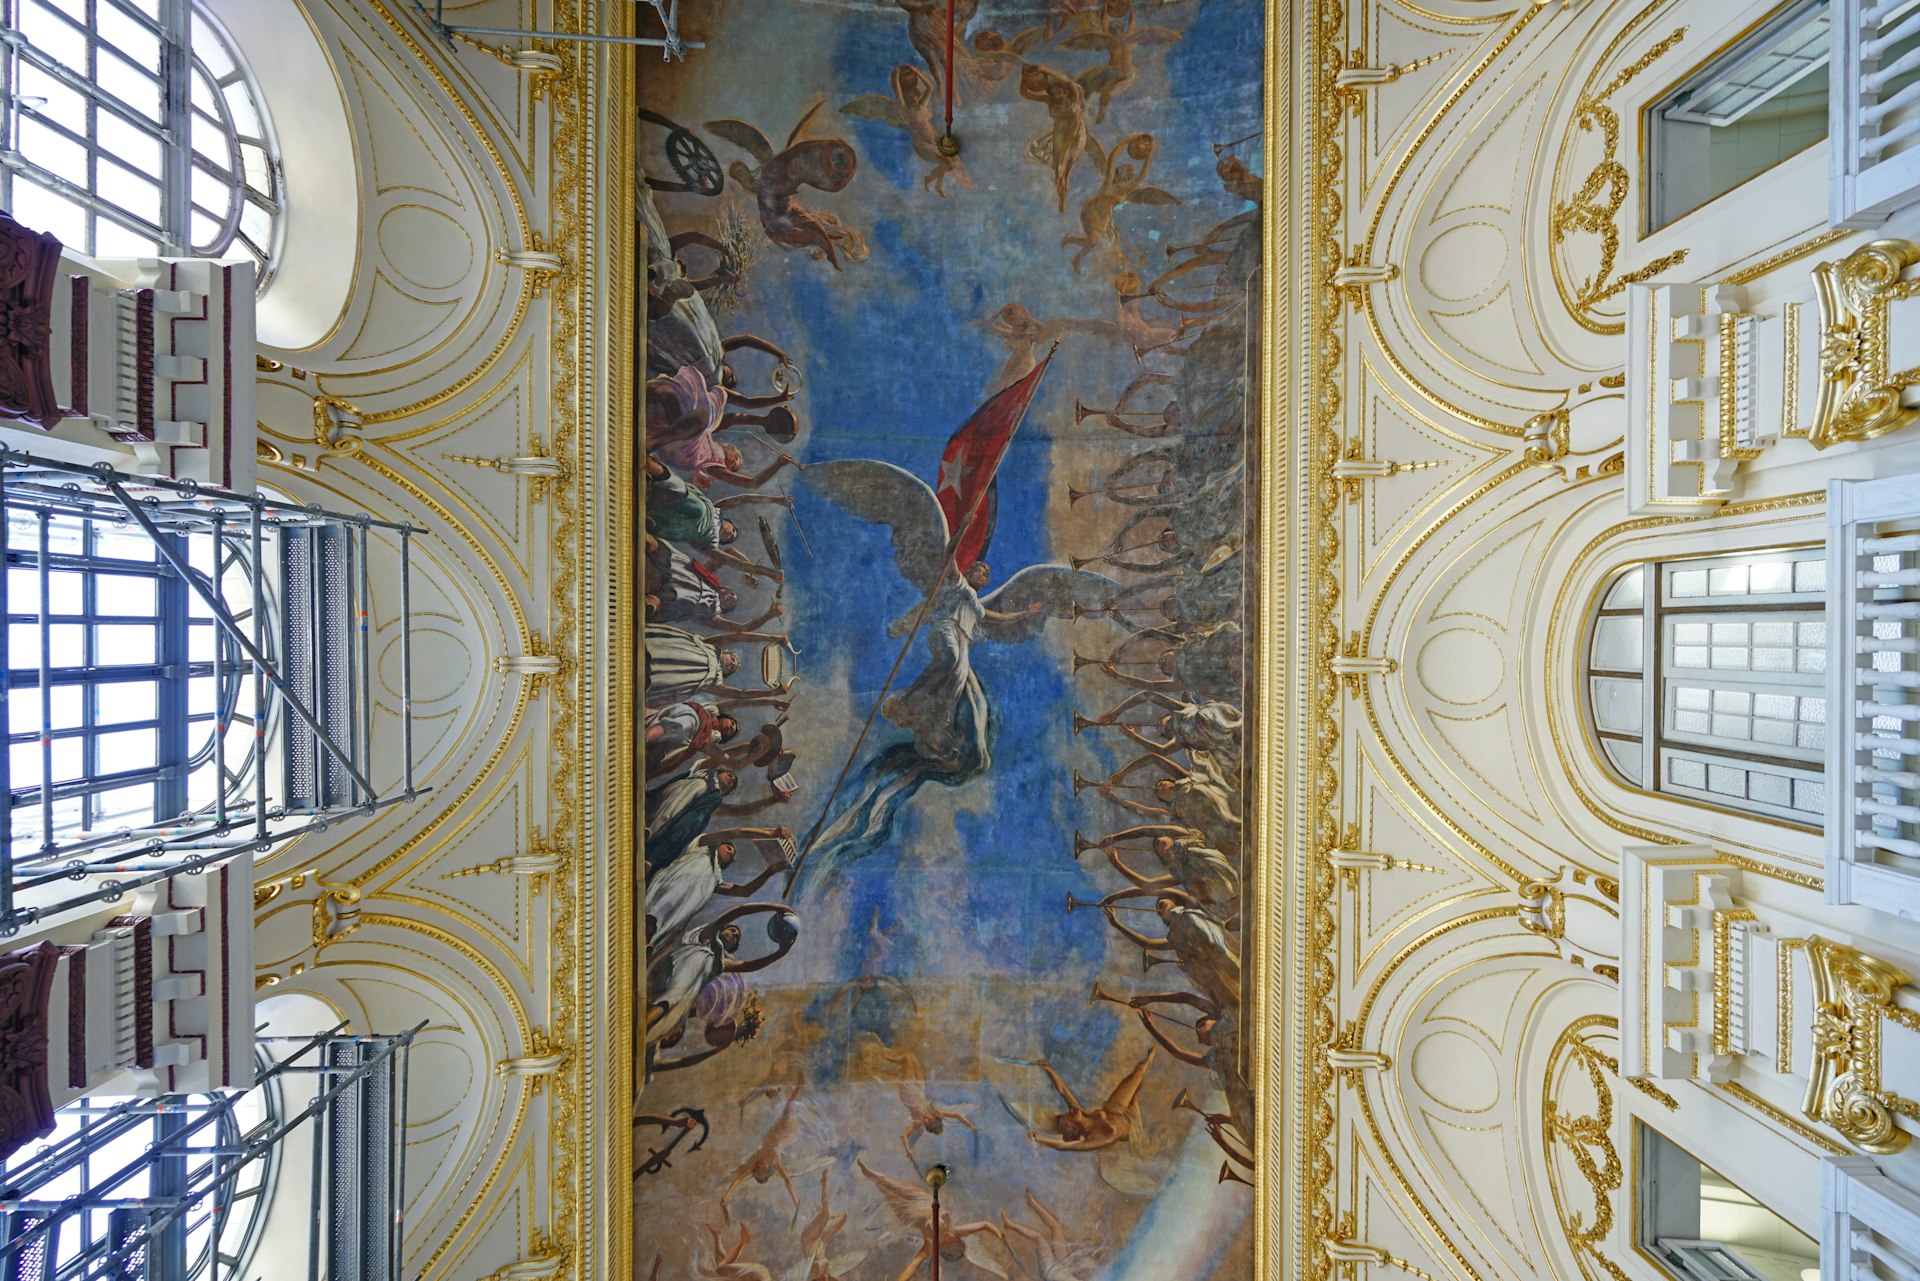 Painted ceiling inside the Museum of the Revolution (Museo de la Revolucion), which is housed in the former Presidential Palace.